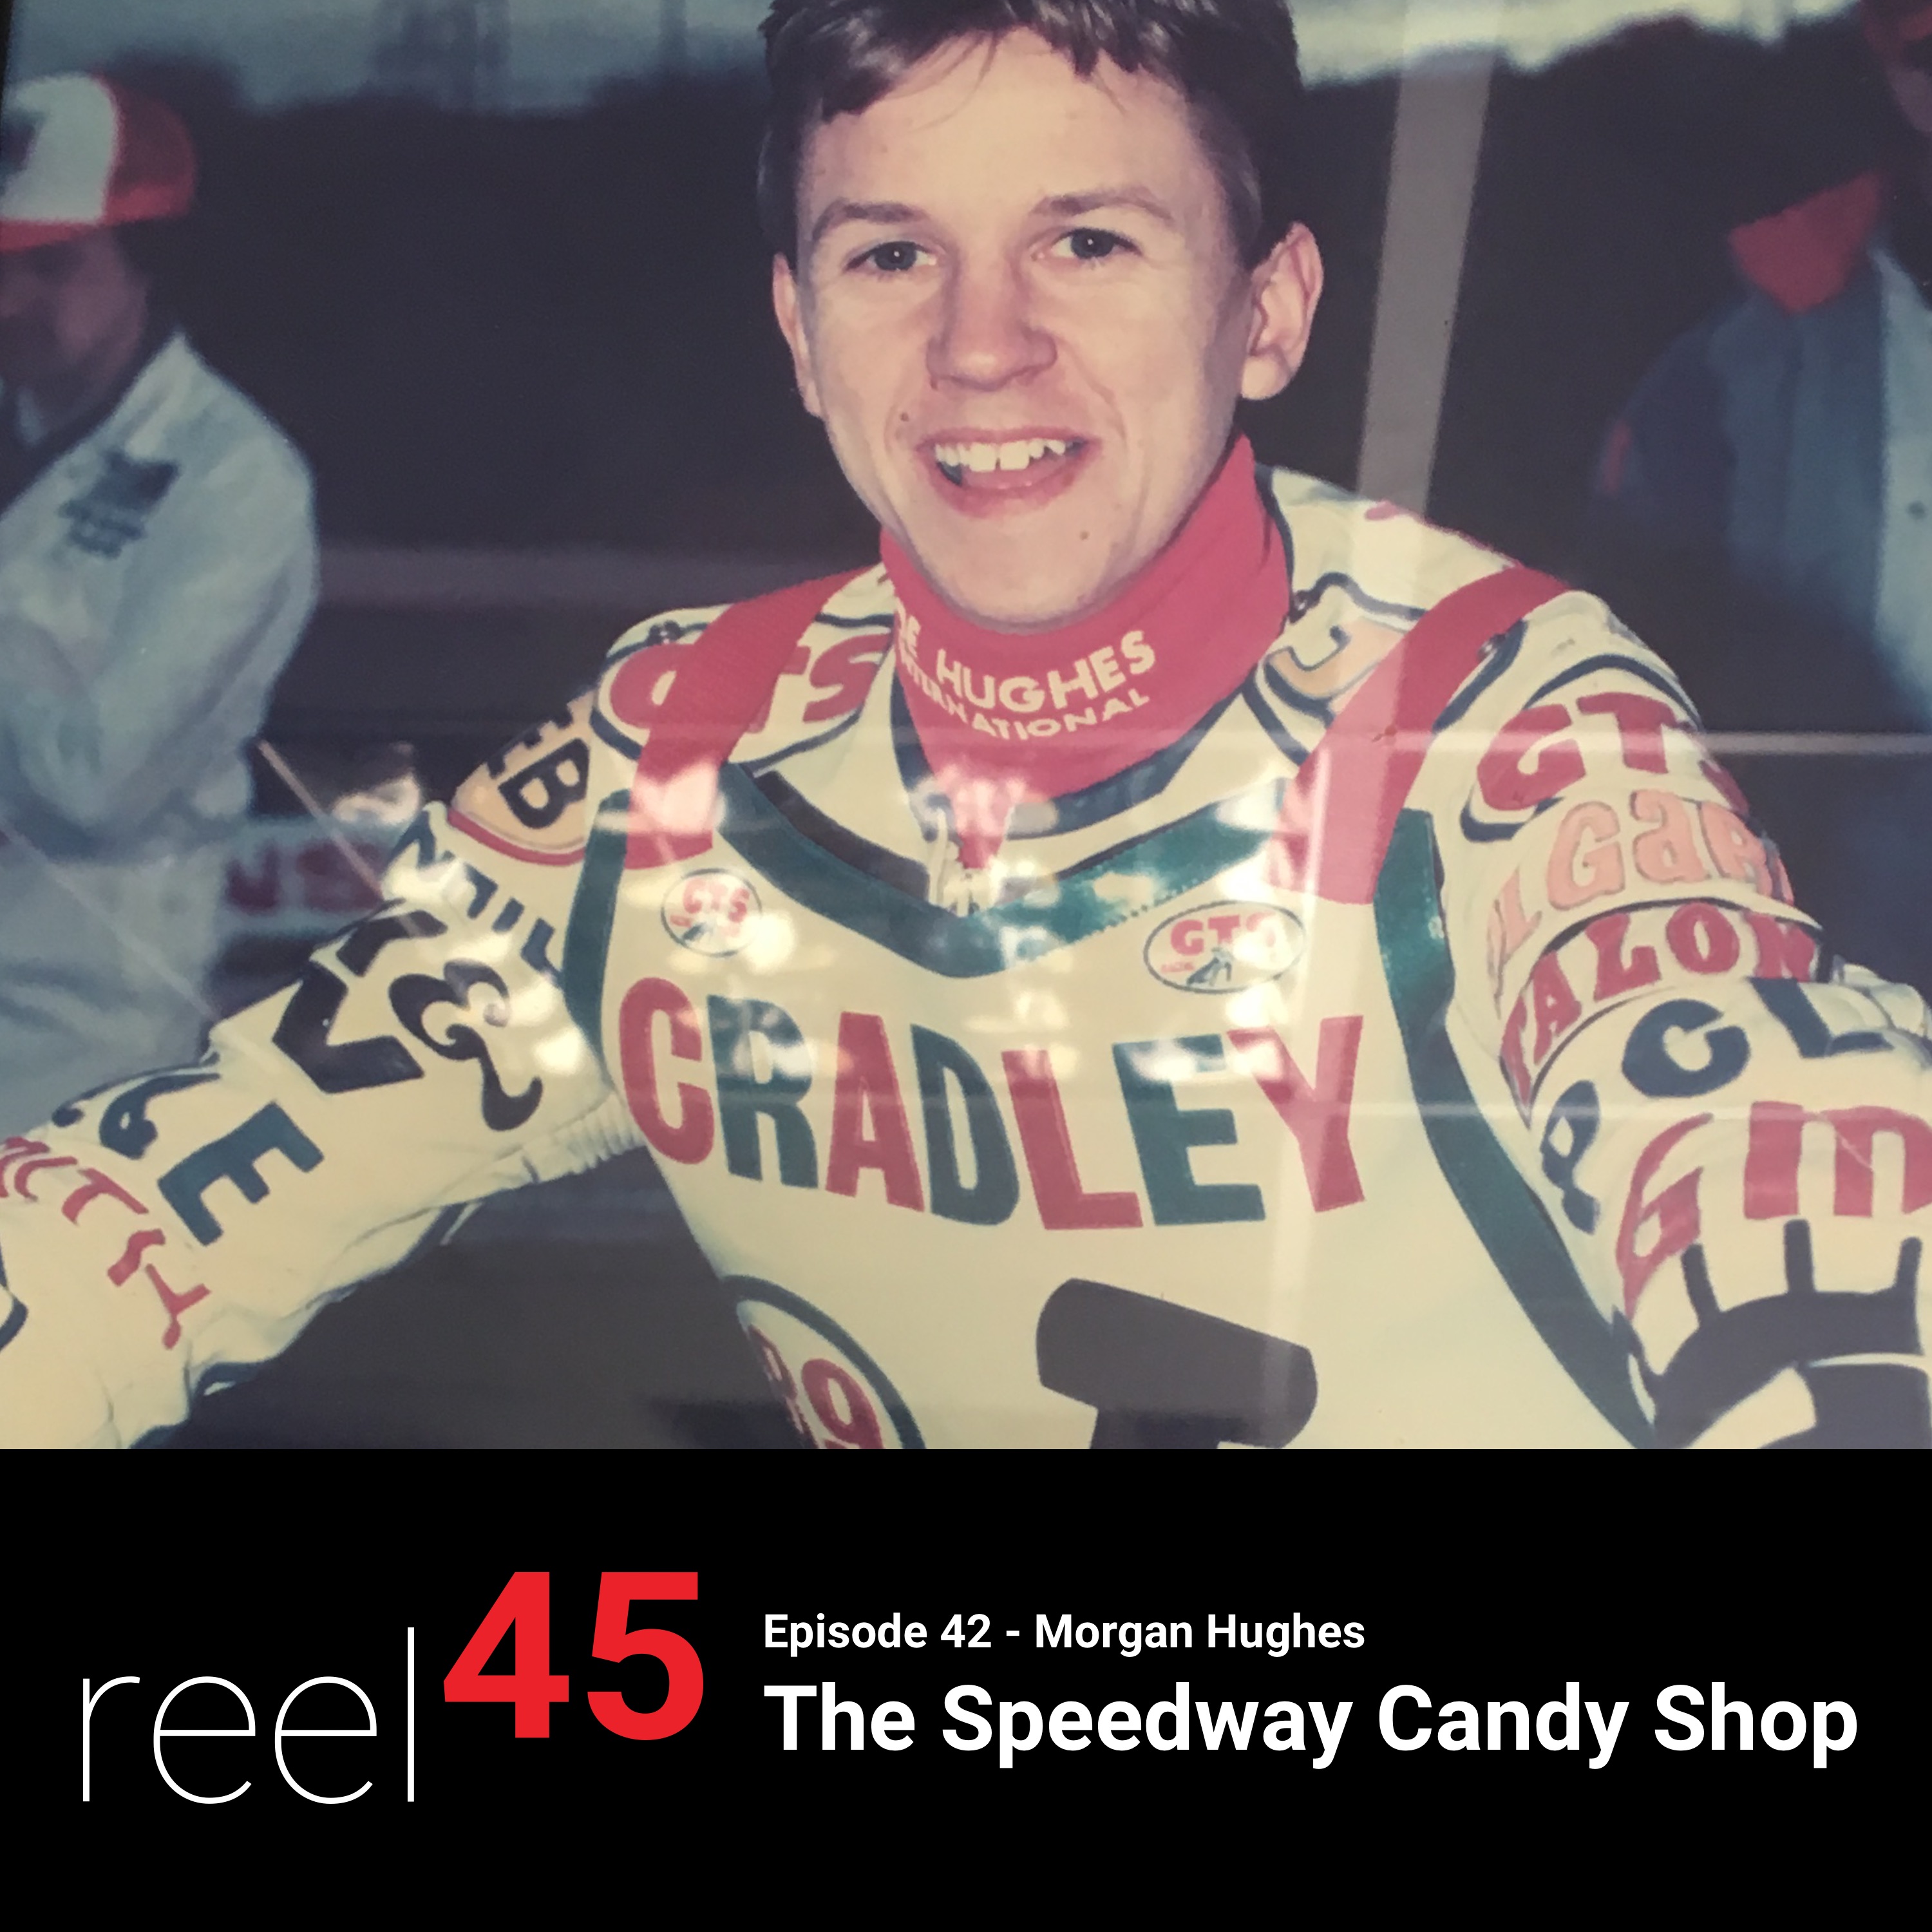 Episode 42 - The Speedway Candy Shop